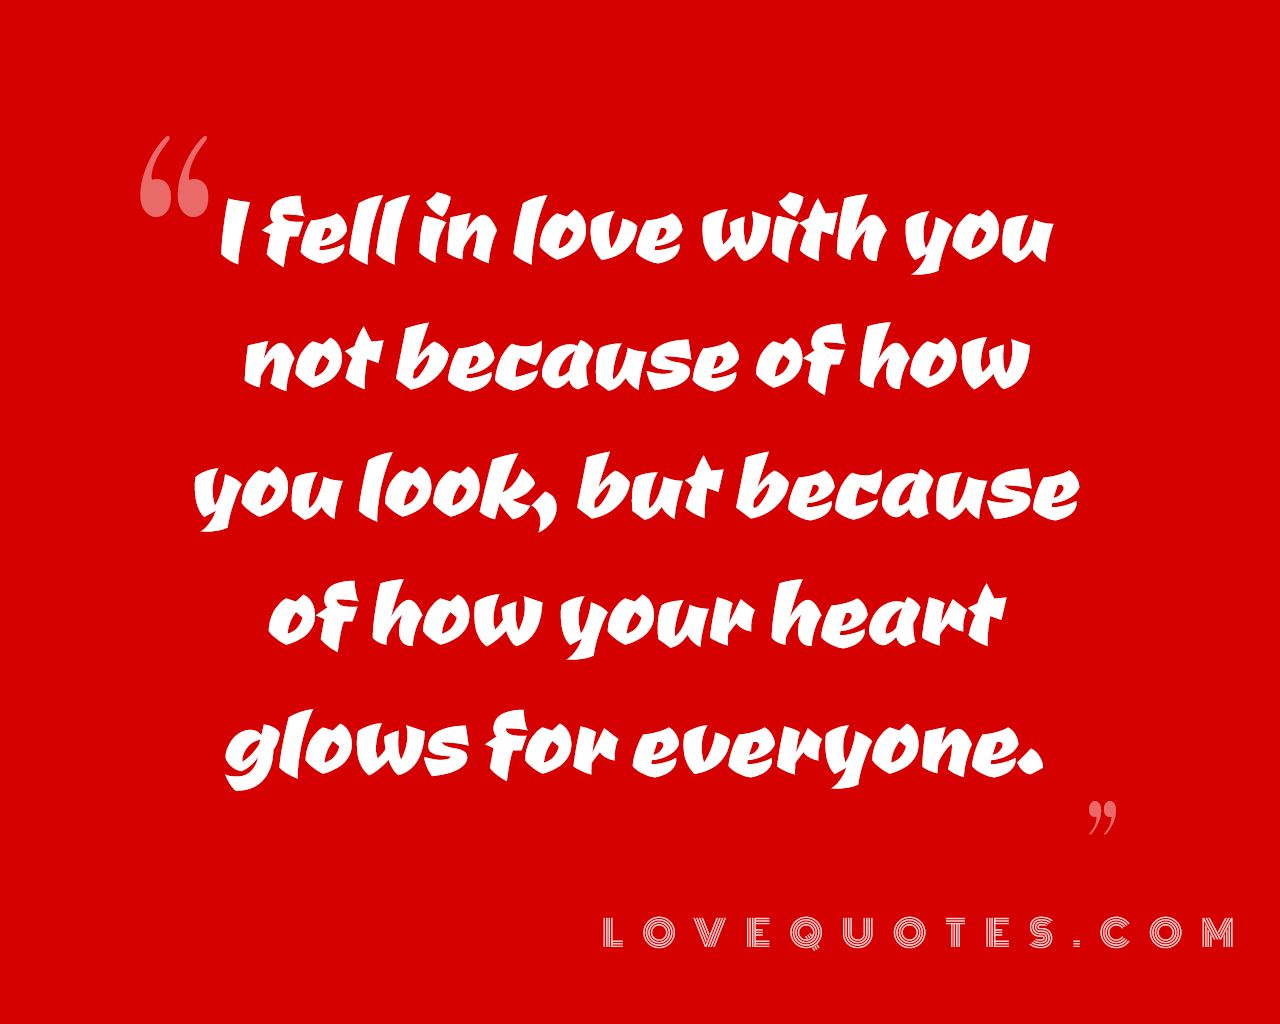 Your Heart Glows - Love Quotes